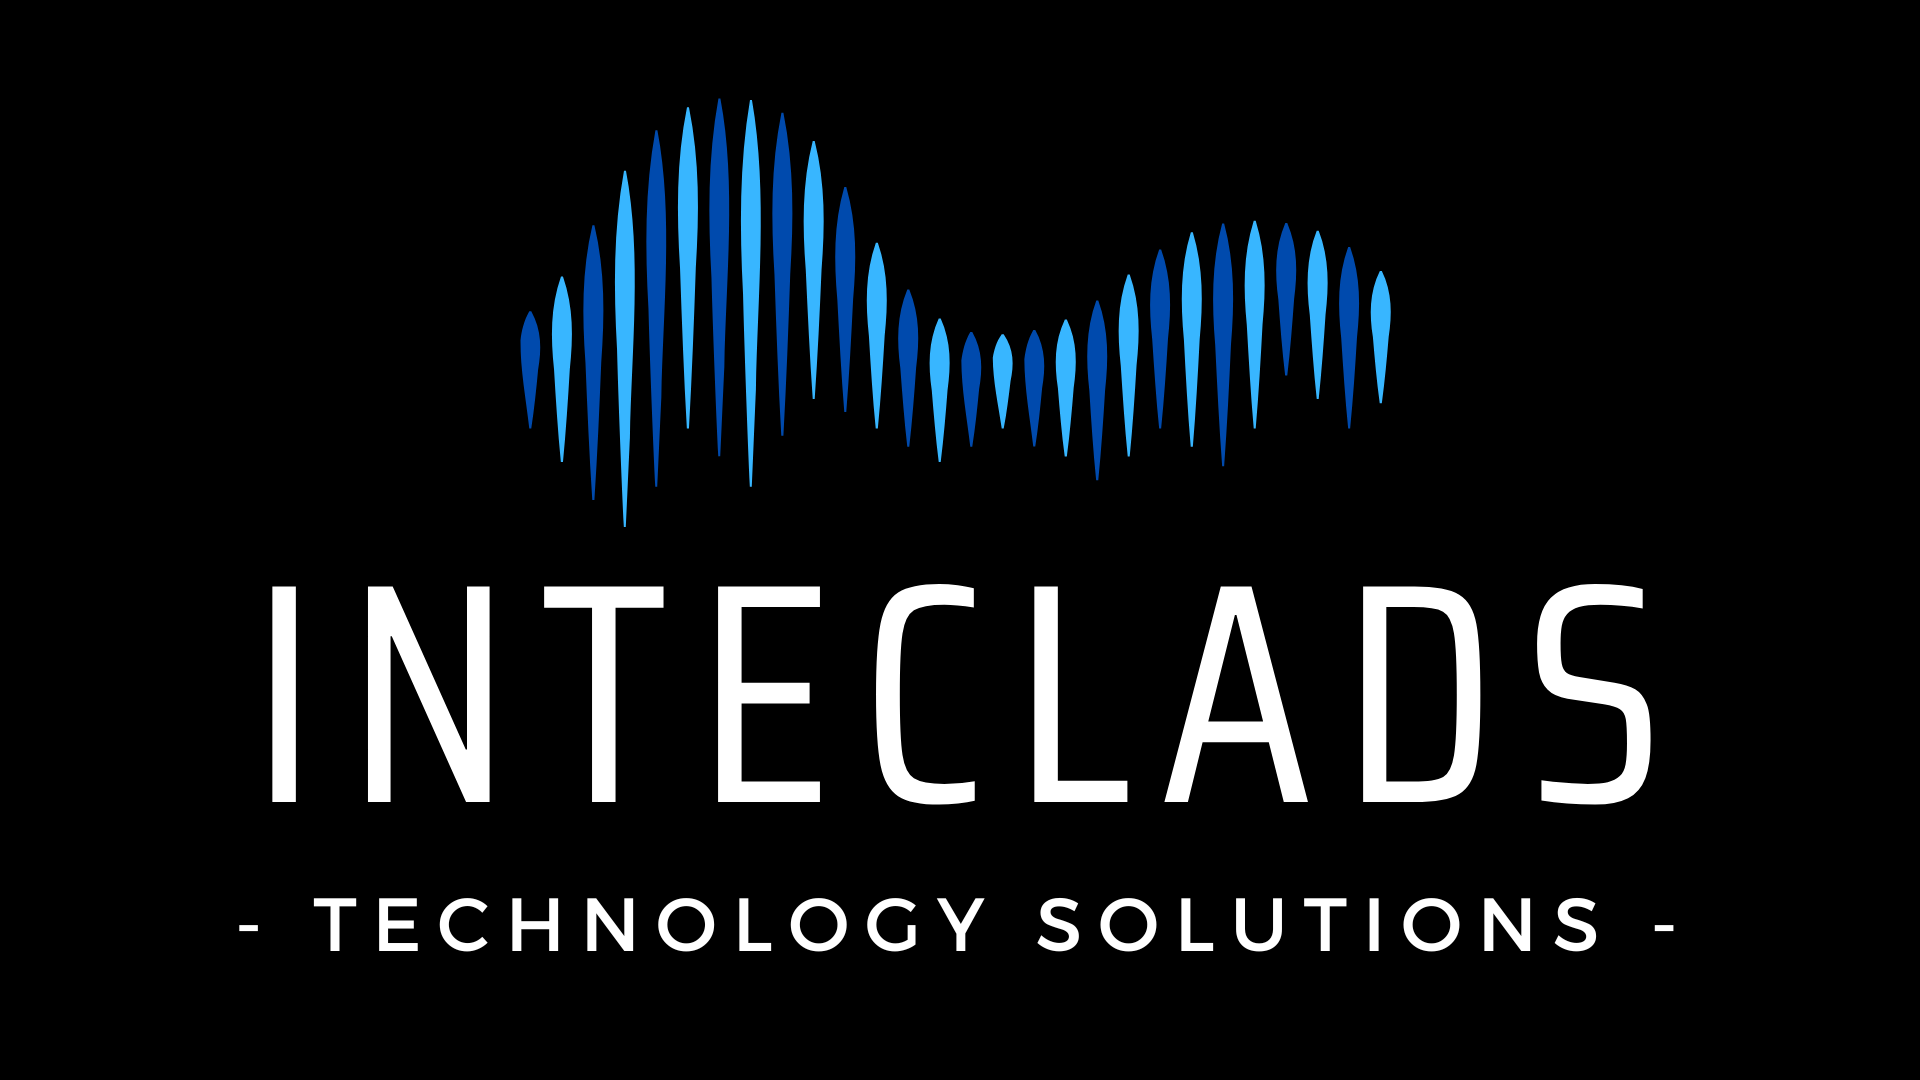 Inteclads Technology Solutions